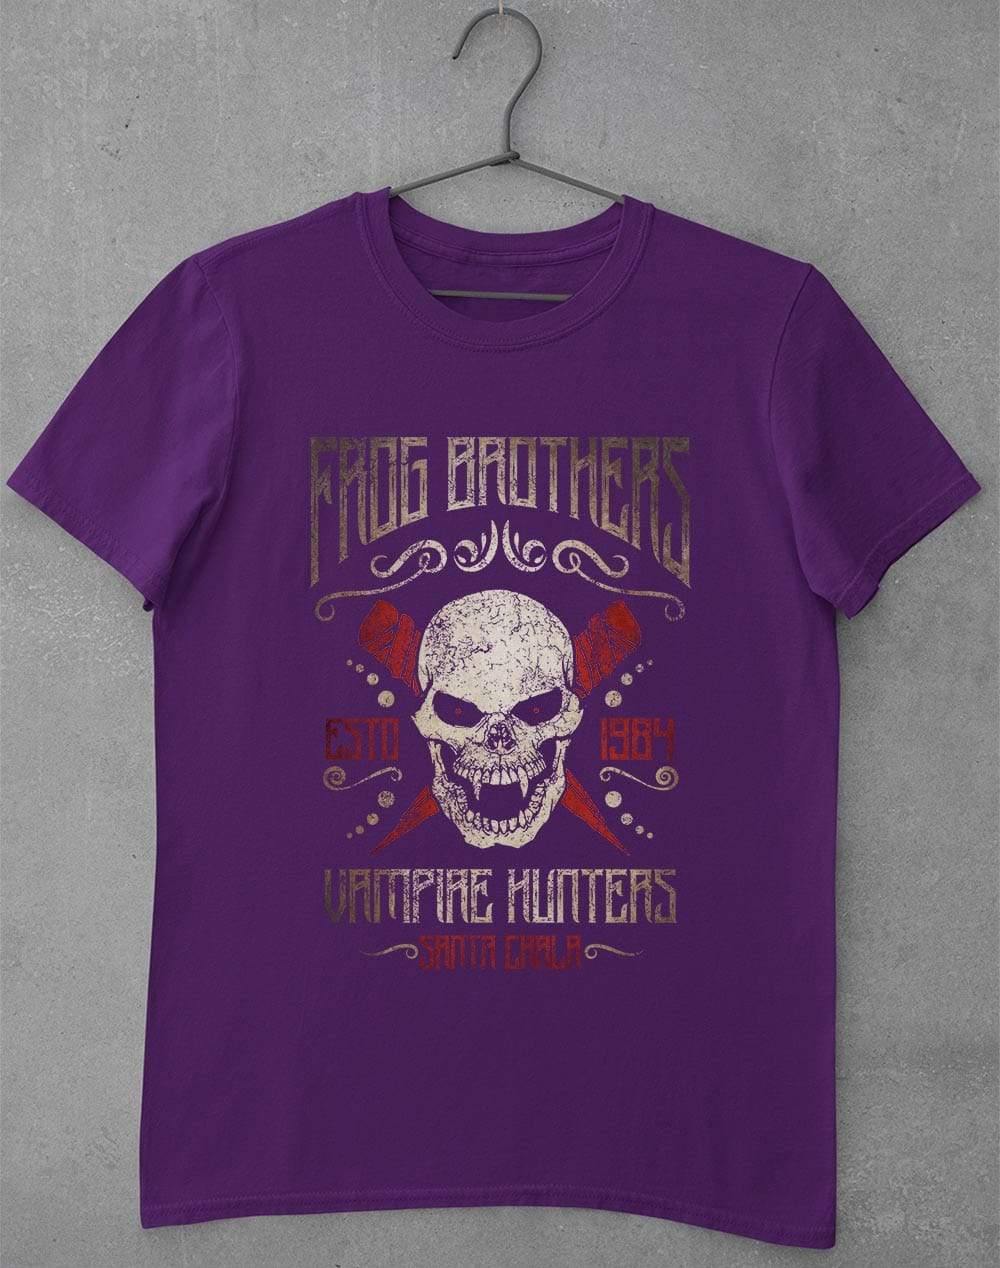 Frog Brothers T-Shirt S / Purple  - Off World Tees